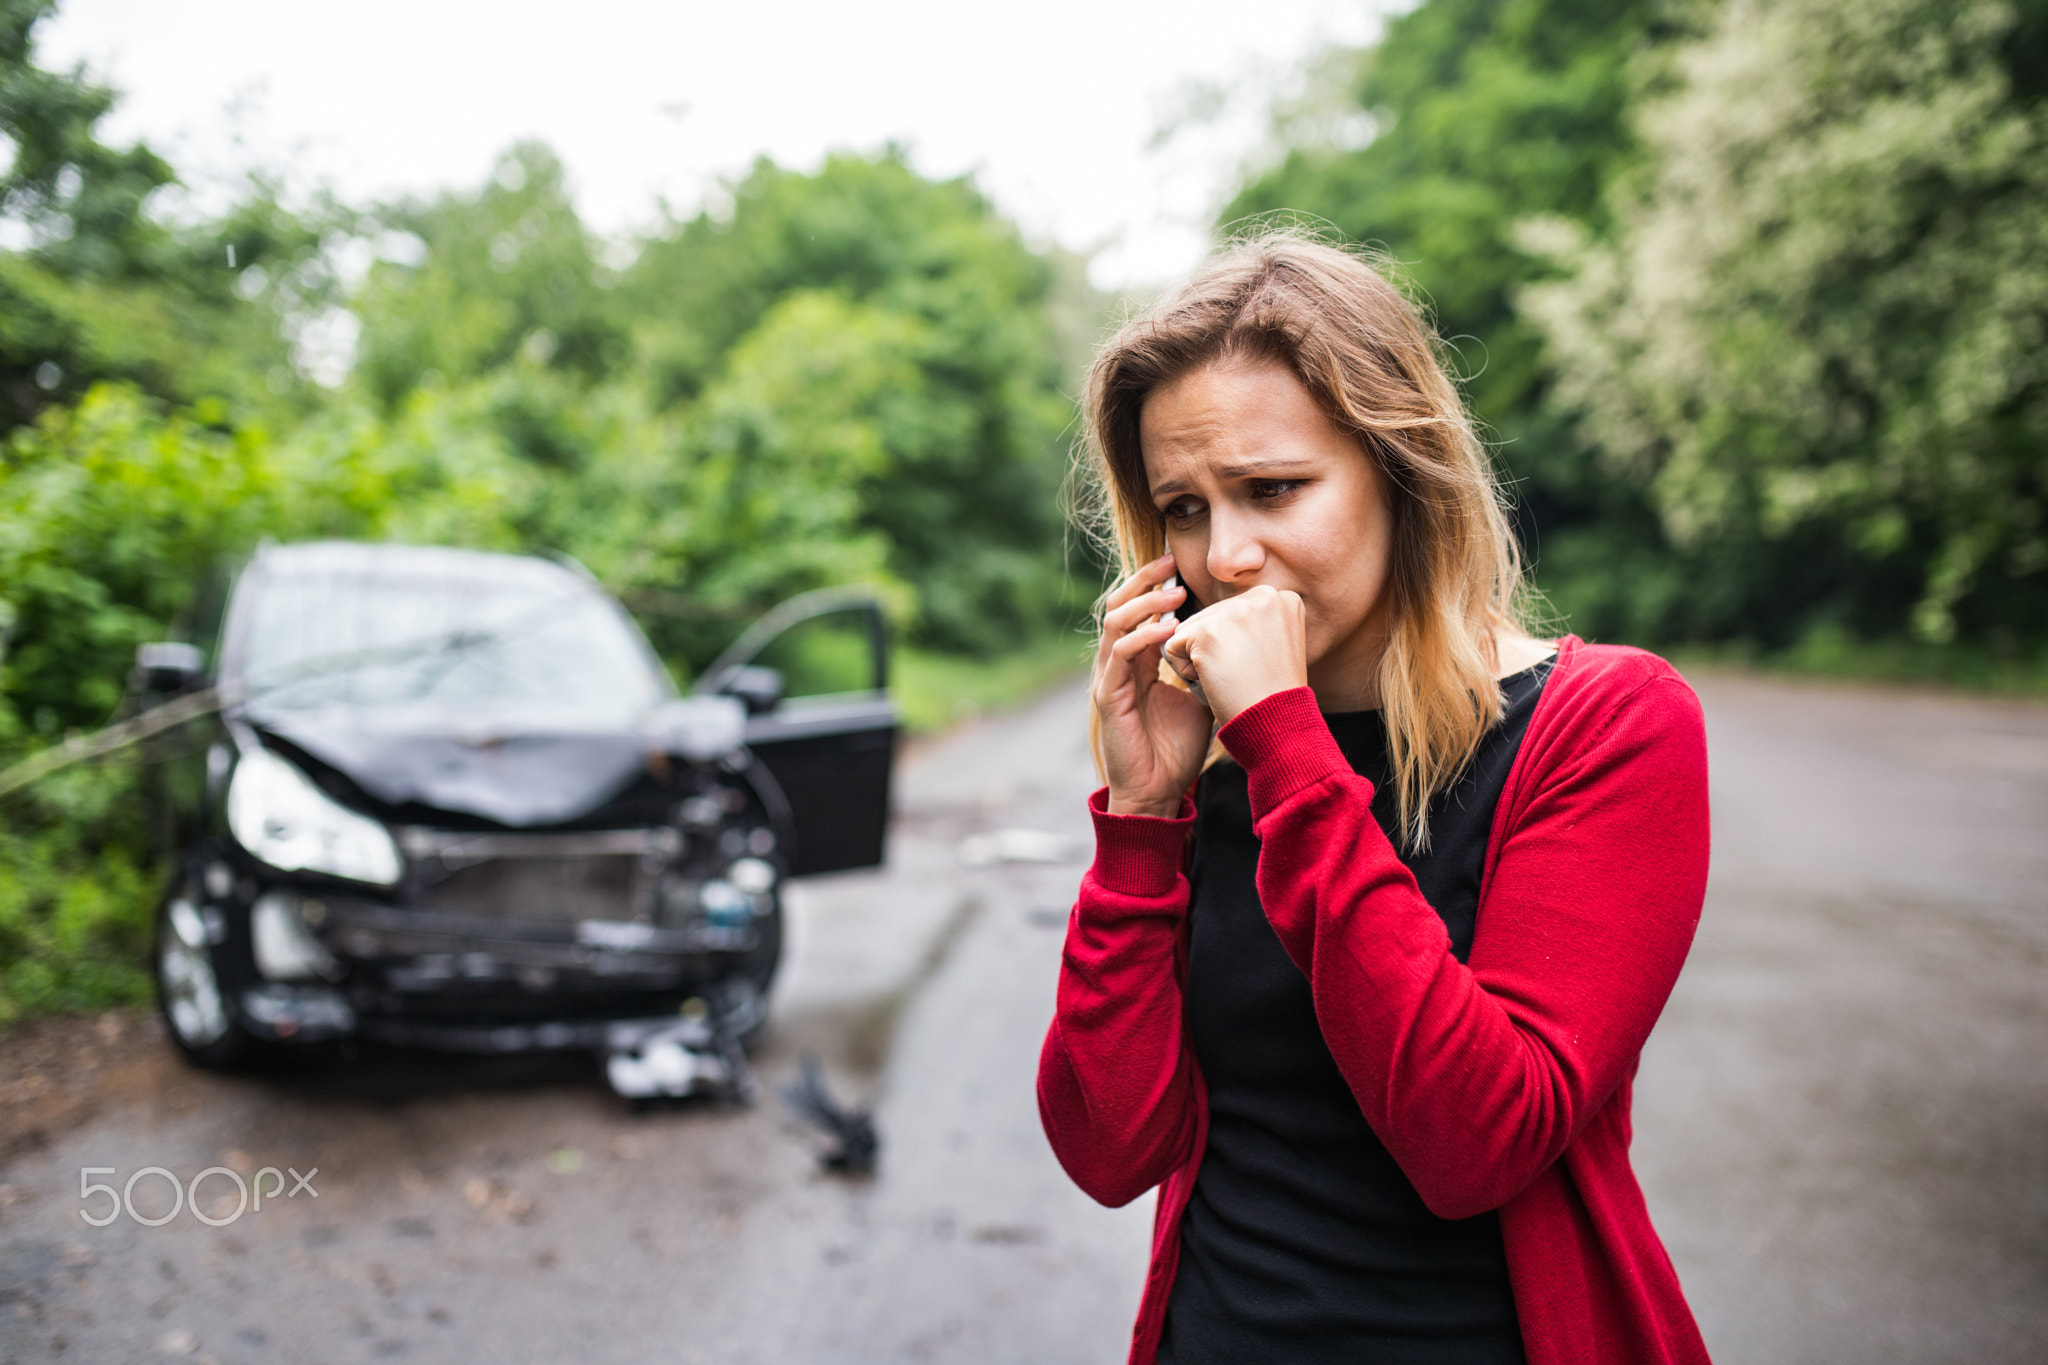 A young woman with smartphone by the damaged car after a car accident, making a phone call.